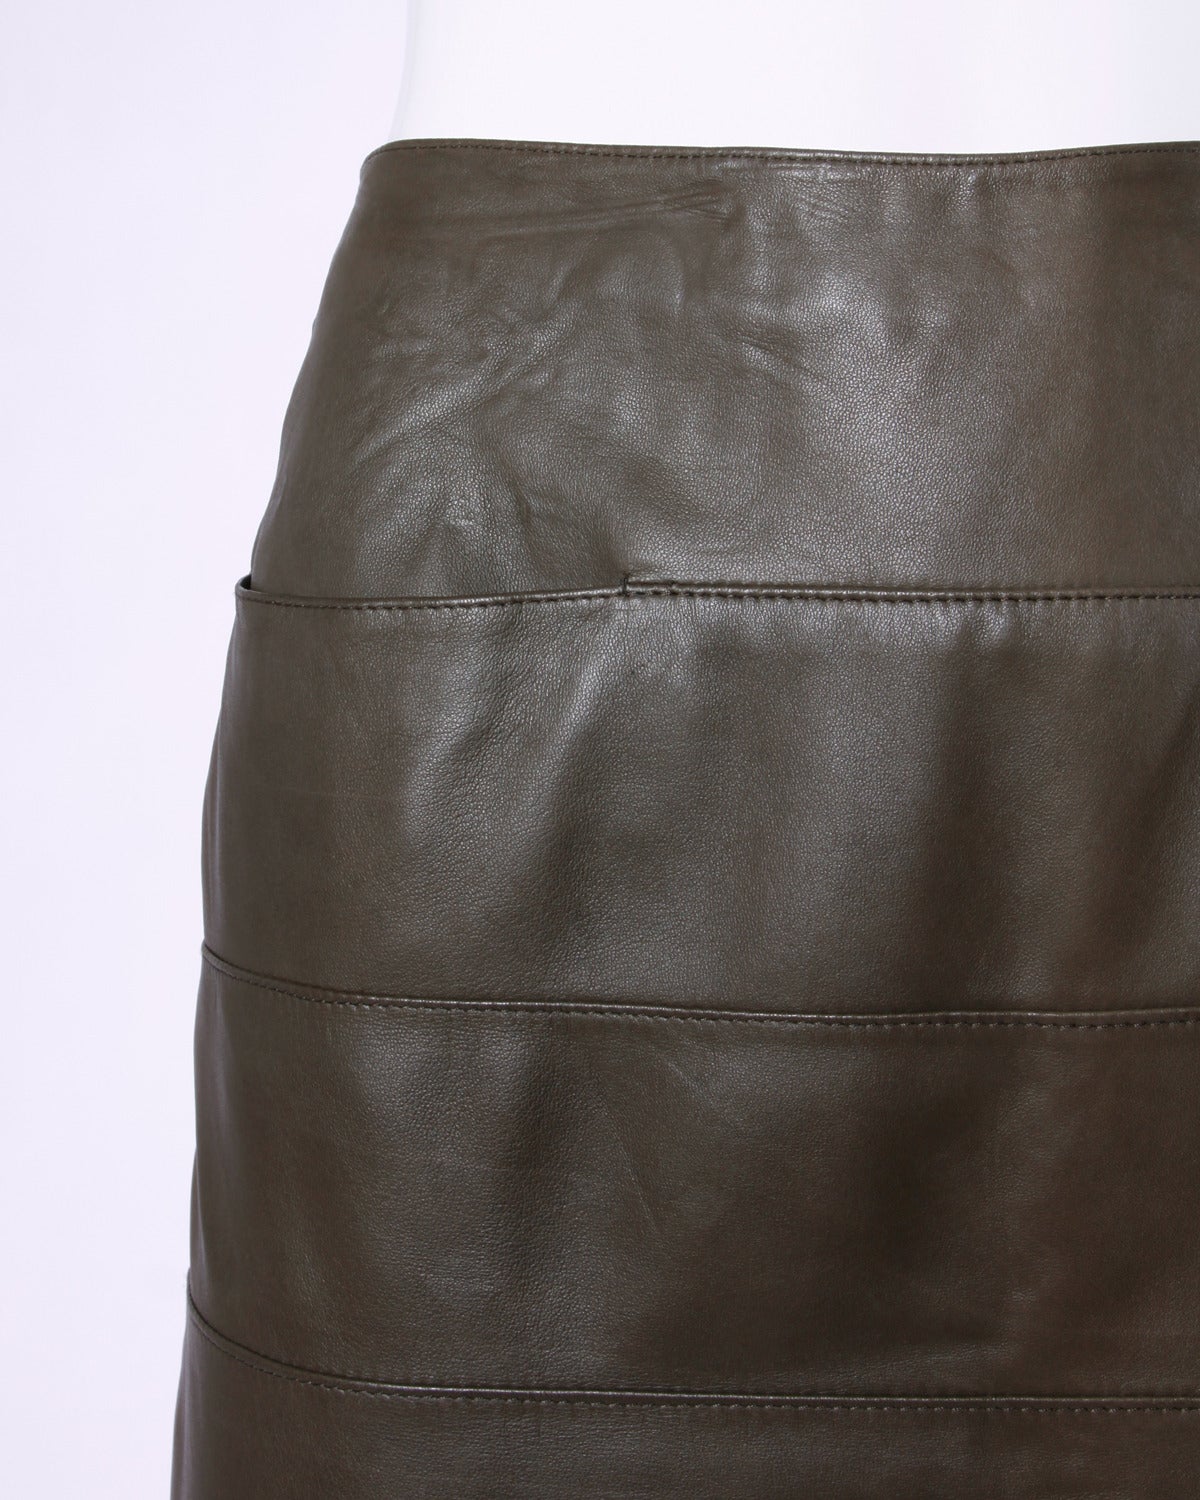 Soft buttery sheepskin leather skirt in olive green by Krizia. Horizontal stitching and hidden slit pockets.

Details:

Fully Lined
Side Zip Closure
Marked Size: 40
Color: Olive Green
Fabric: Sheepskin Leather/ Rayon Lining
Label: